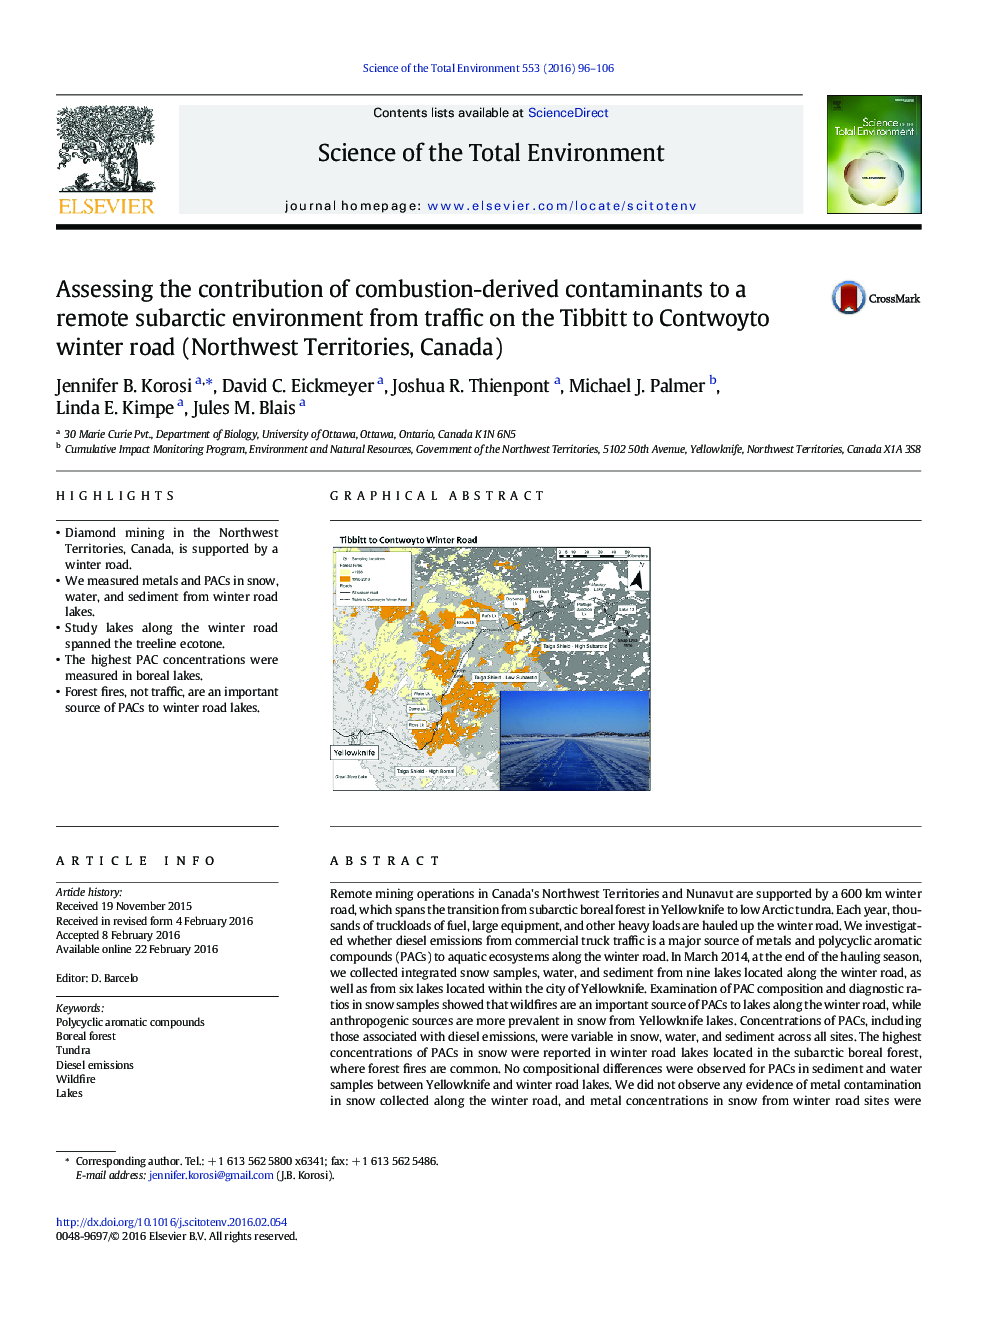 Assessing the contribution of combustion-derived contaminants to a remote subarctic environment from traffic on the Tibbitt to Contwoyto winter road (Northwest Territories, Canada)